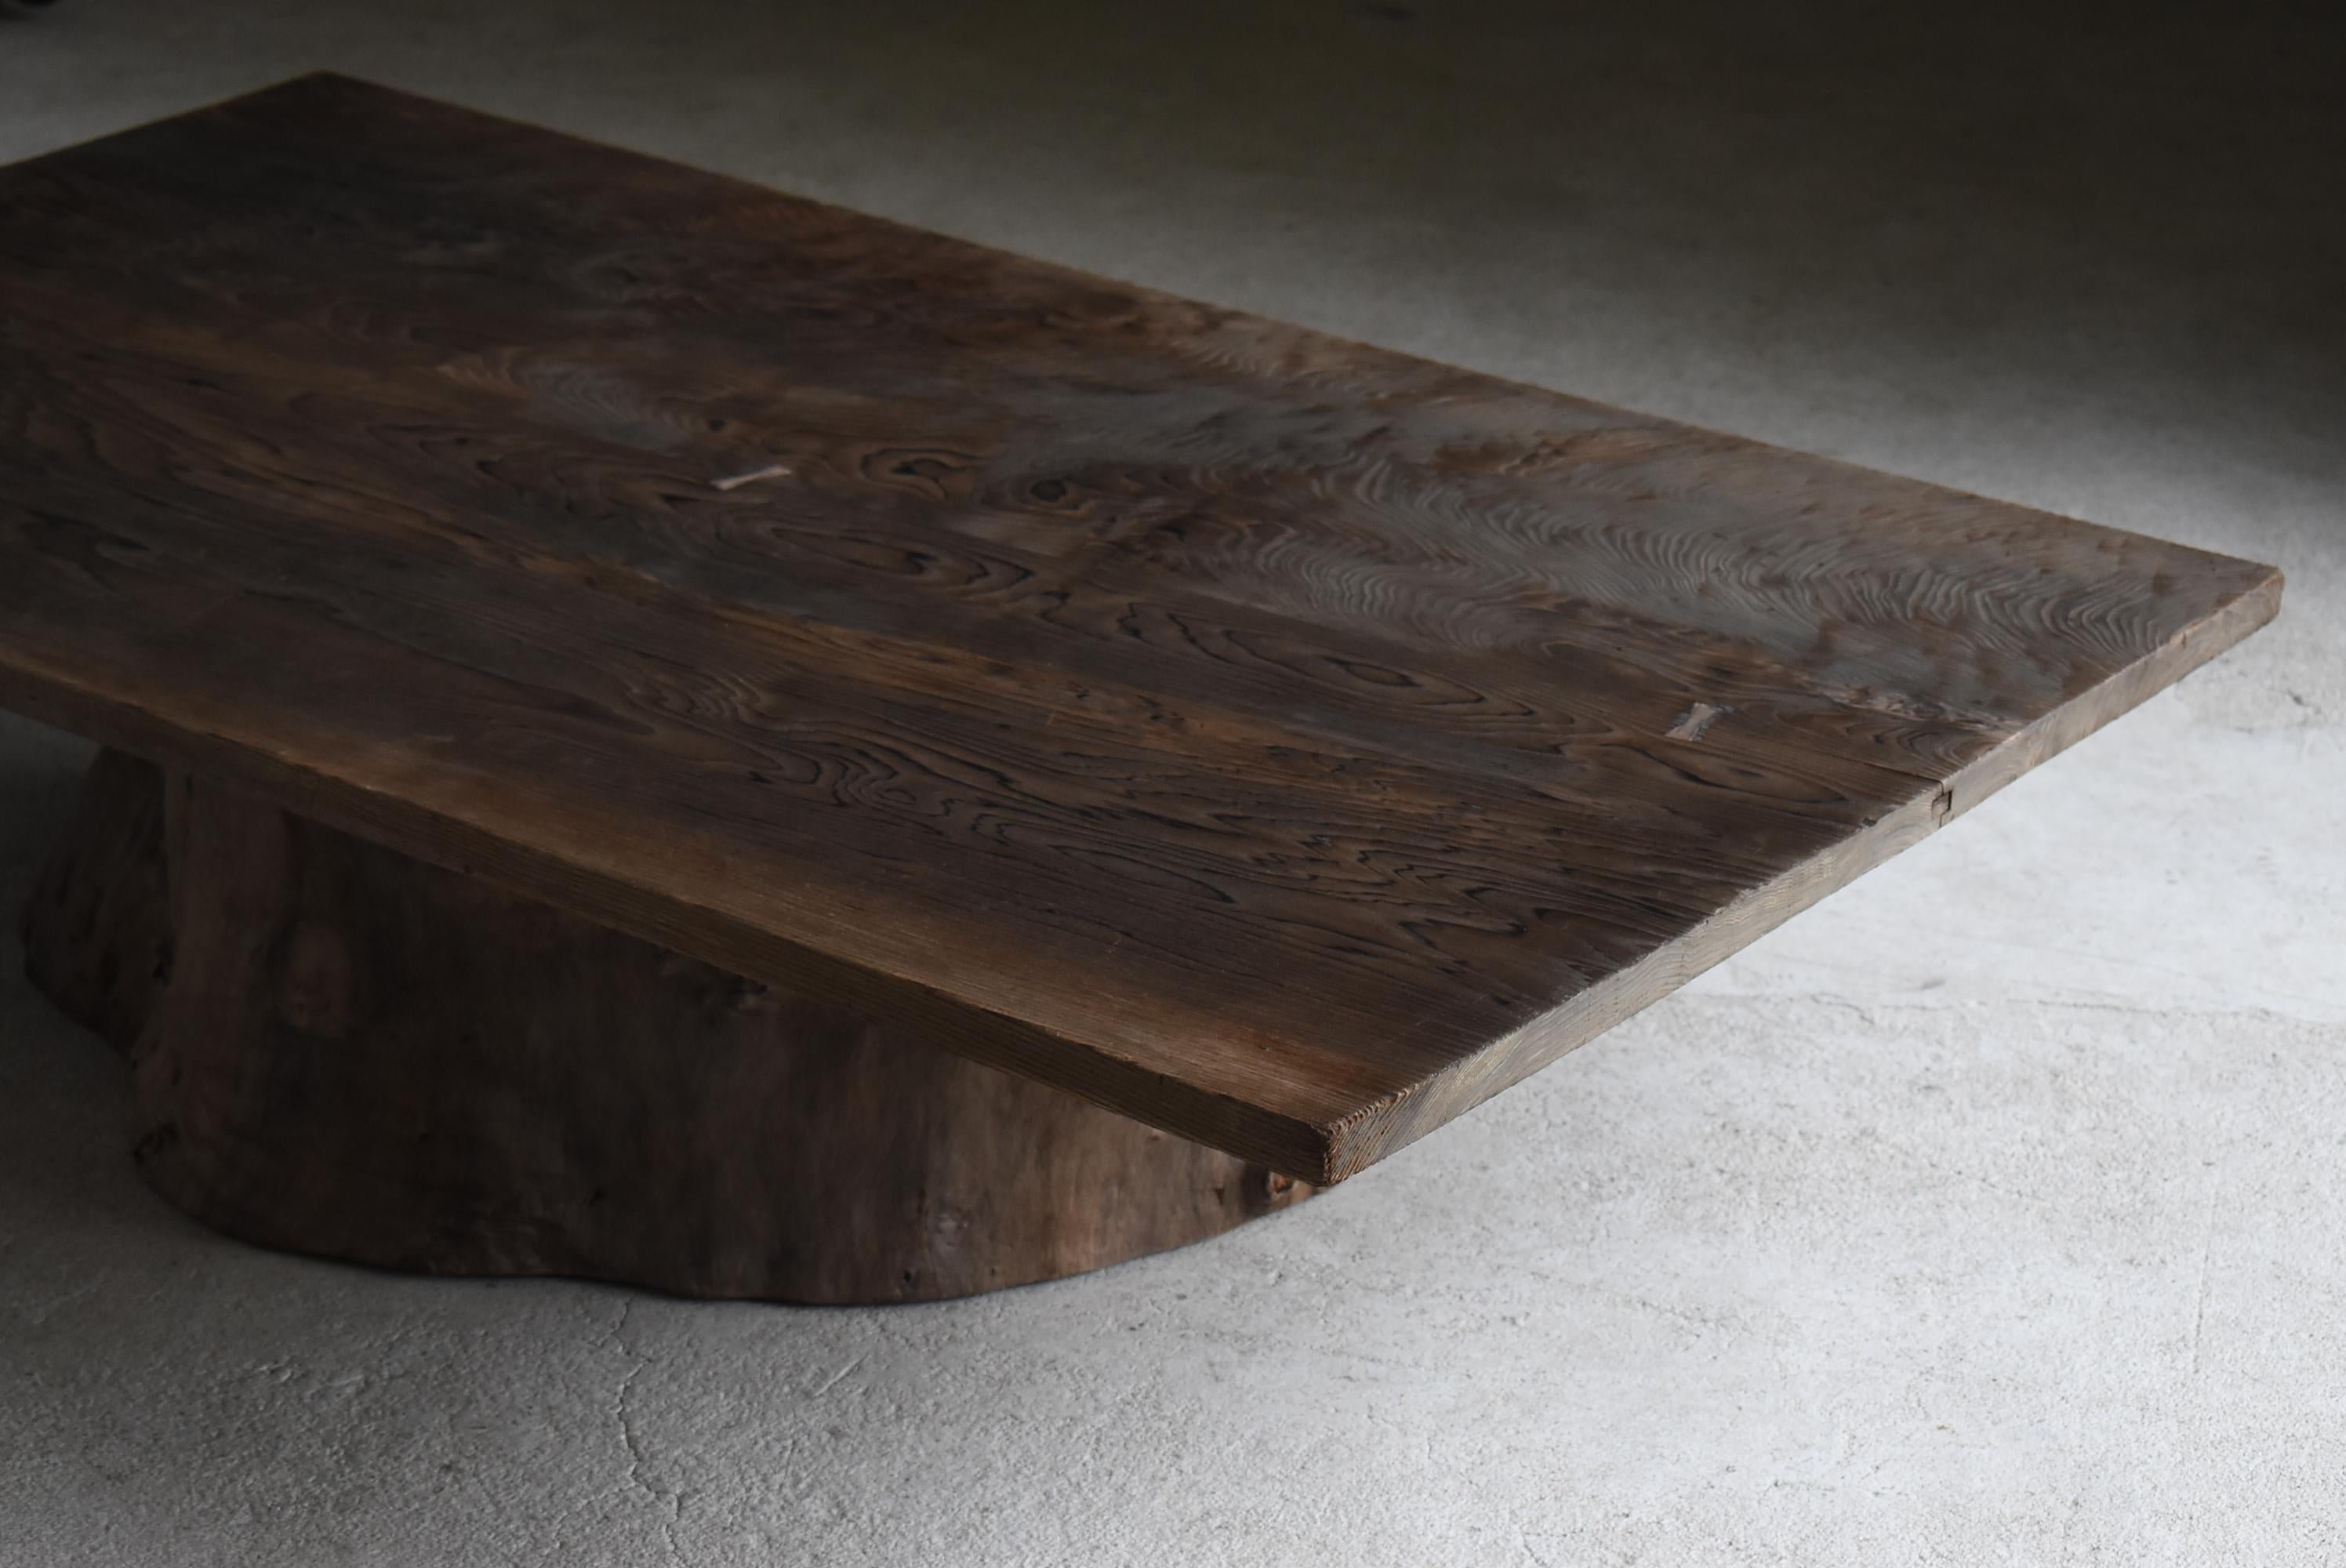 Very old Japanese primitive style coffee table.
Simple design with a single board on a stump.
Furniture from the Meiji period (1860s-1900s).

It is a single piece of wood.
The grain of the wood is very beautiful.
The stumps match perfectly with the